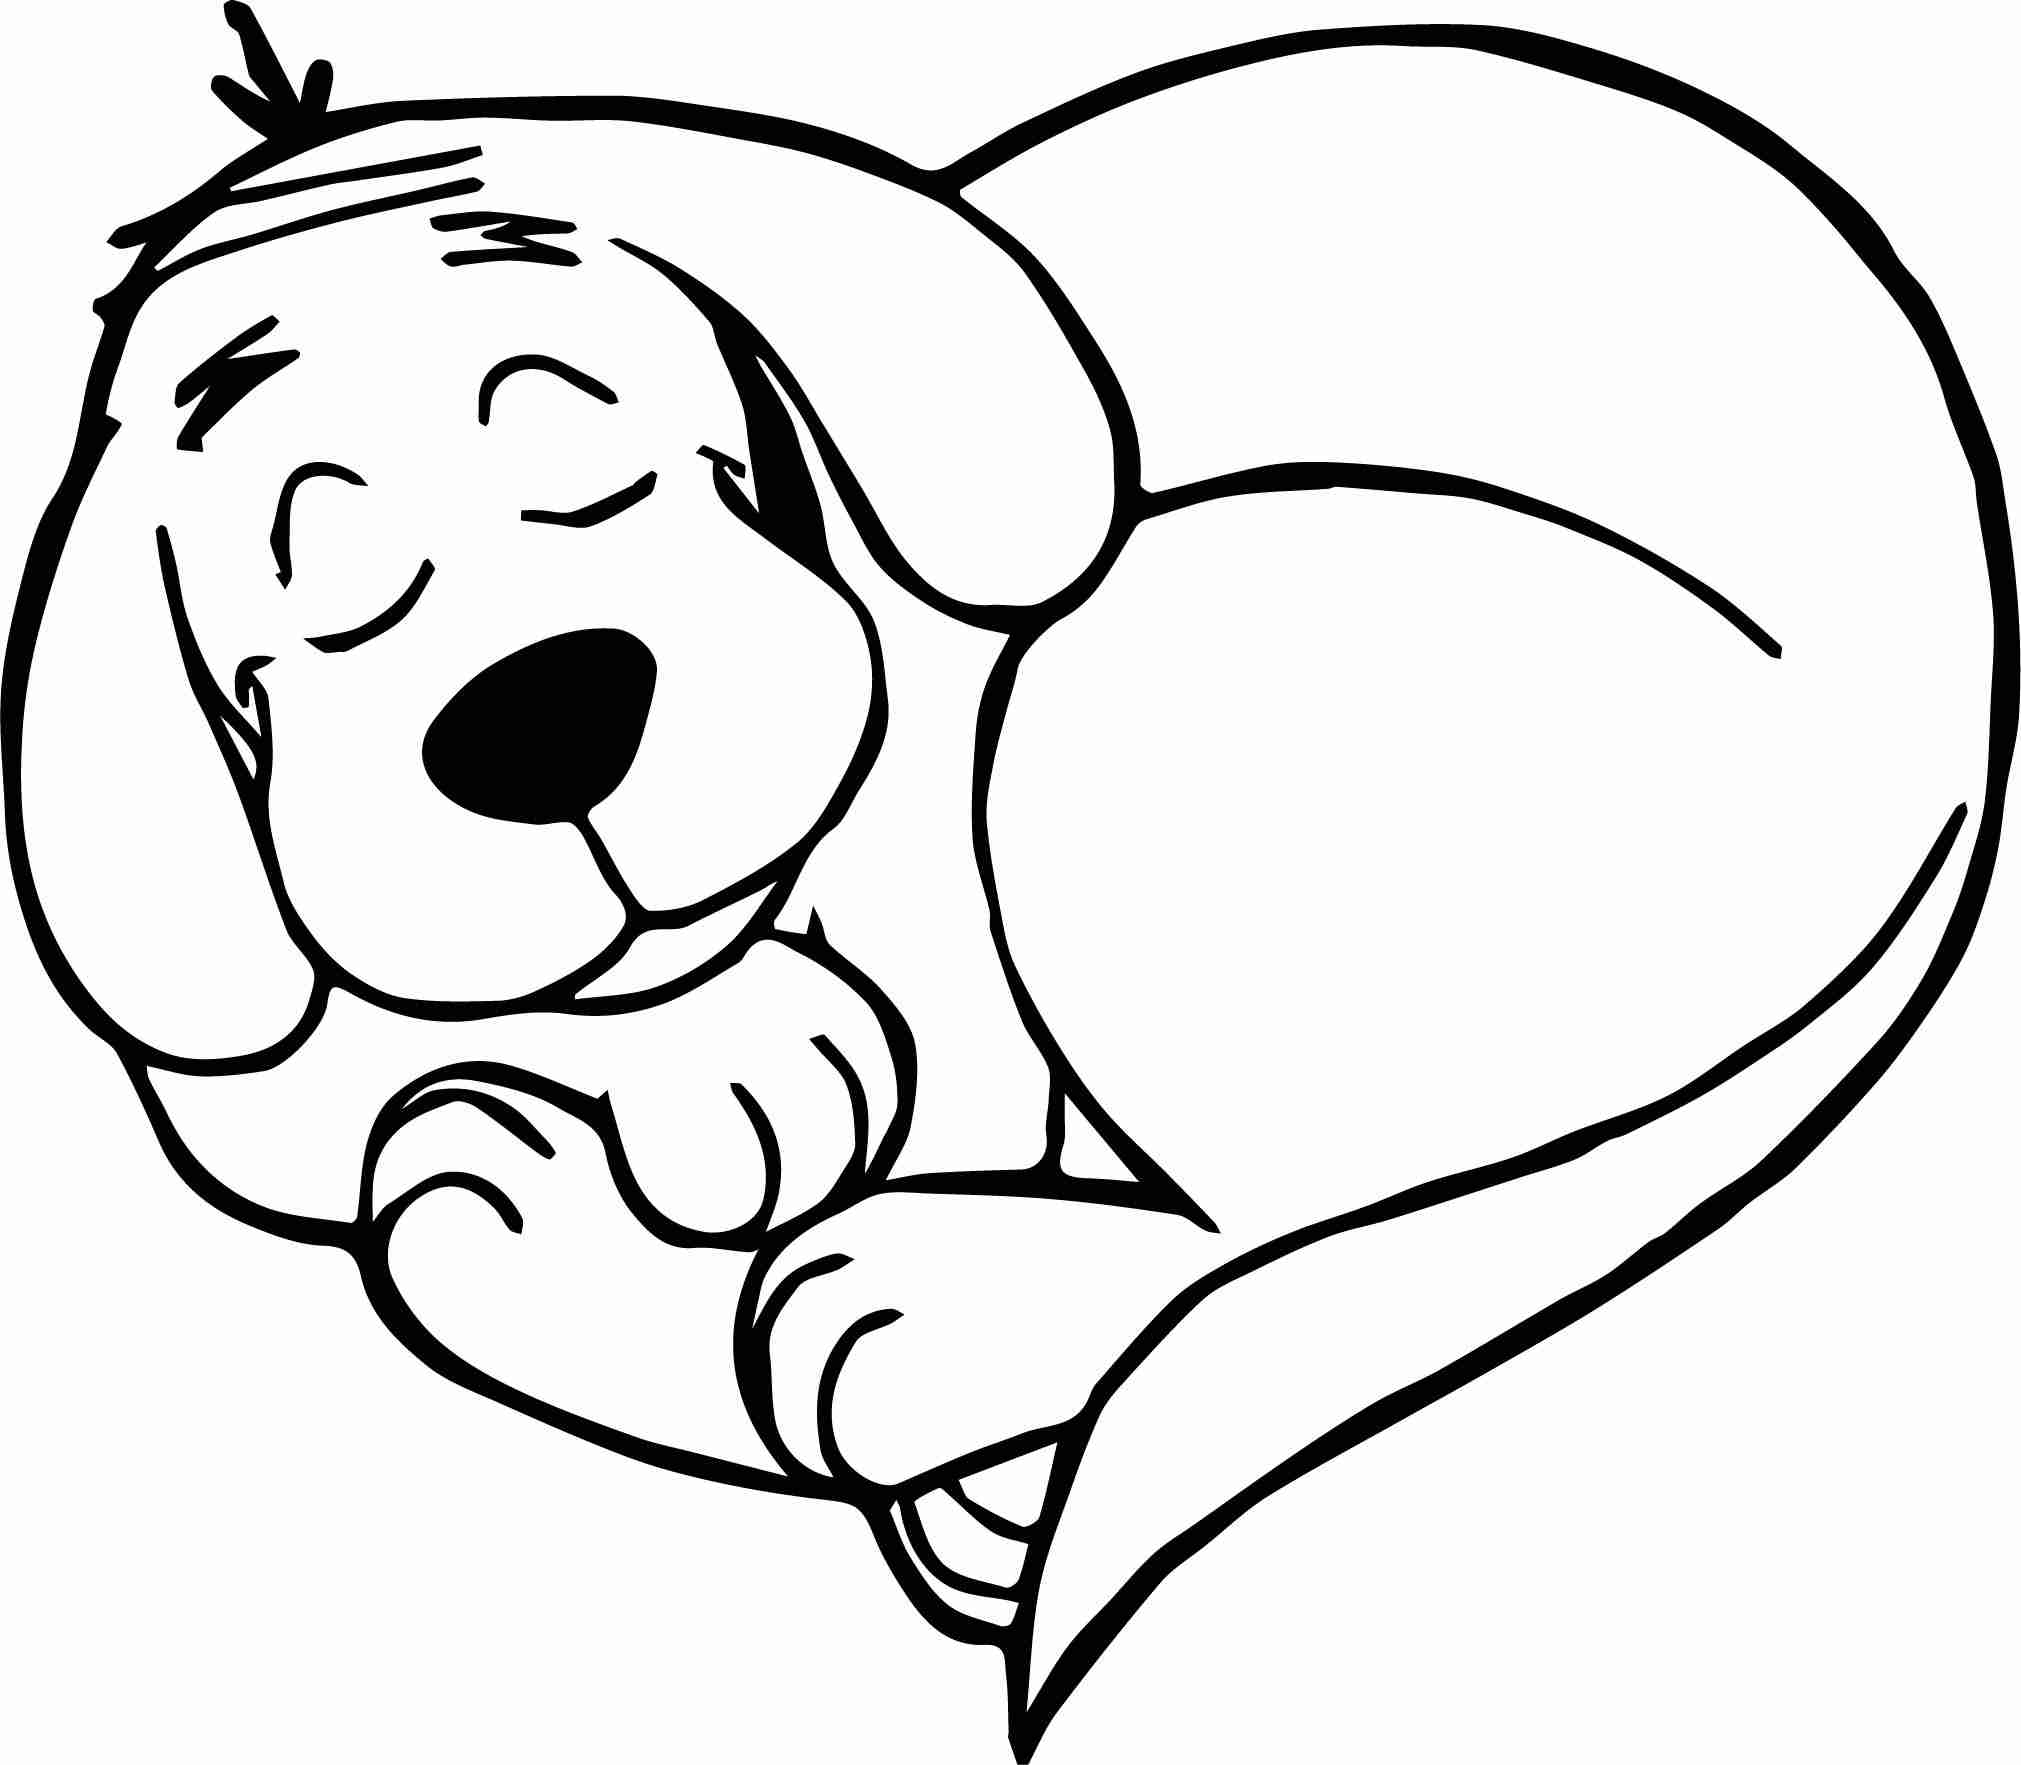 clifford coloring pages